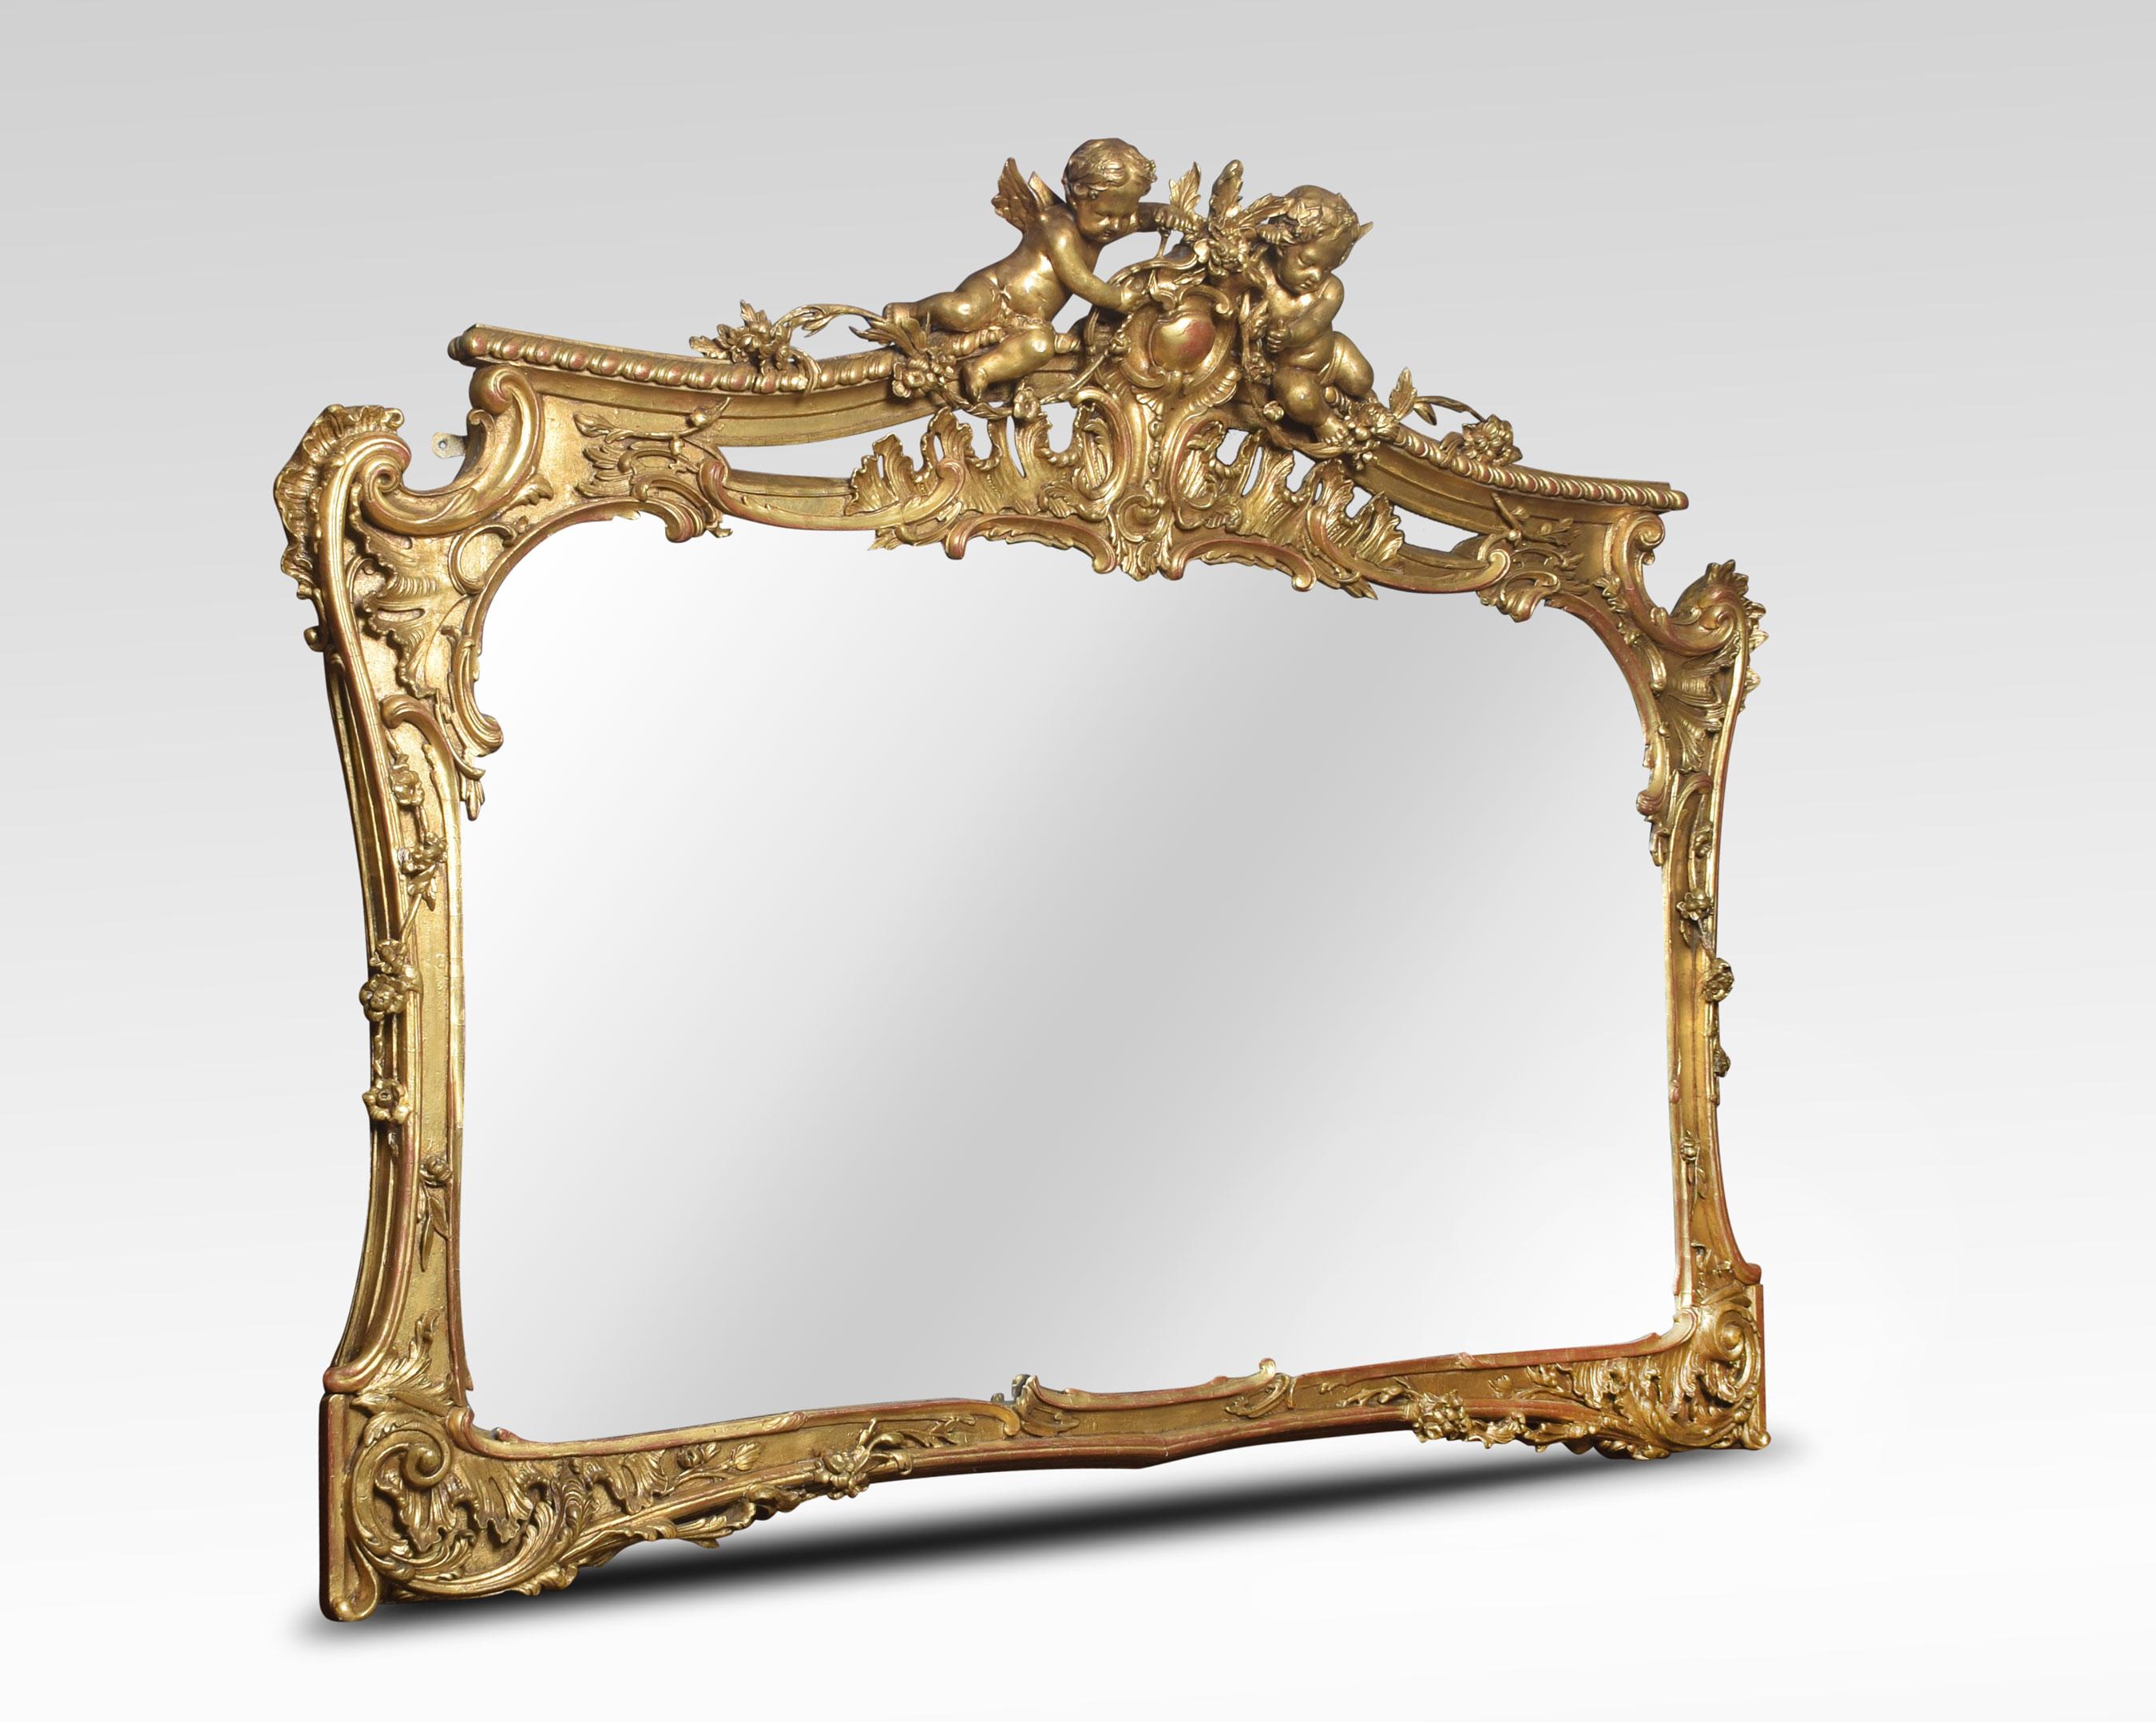 19th century gilt overmantel mirror. The shaped rectangular mirror plate surmounted with winged cherubs over a rocaille carved and pierced frieze, floral trails and rocaille work extending throughout the frame.
Dimensions:
Height 59 inches
Width